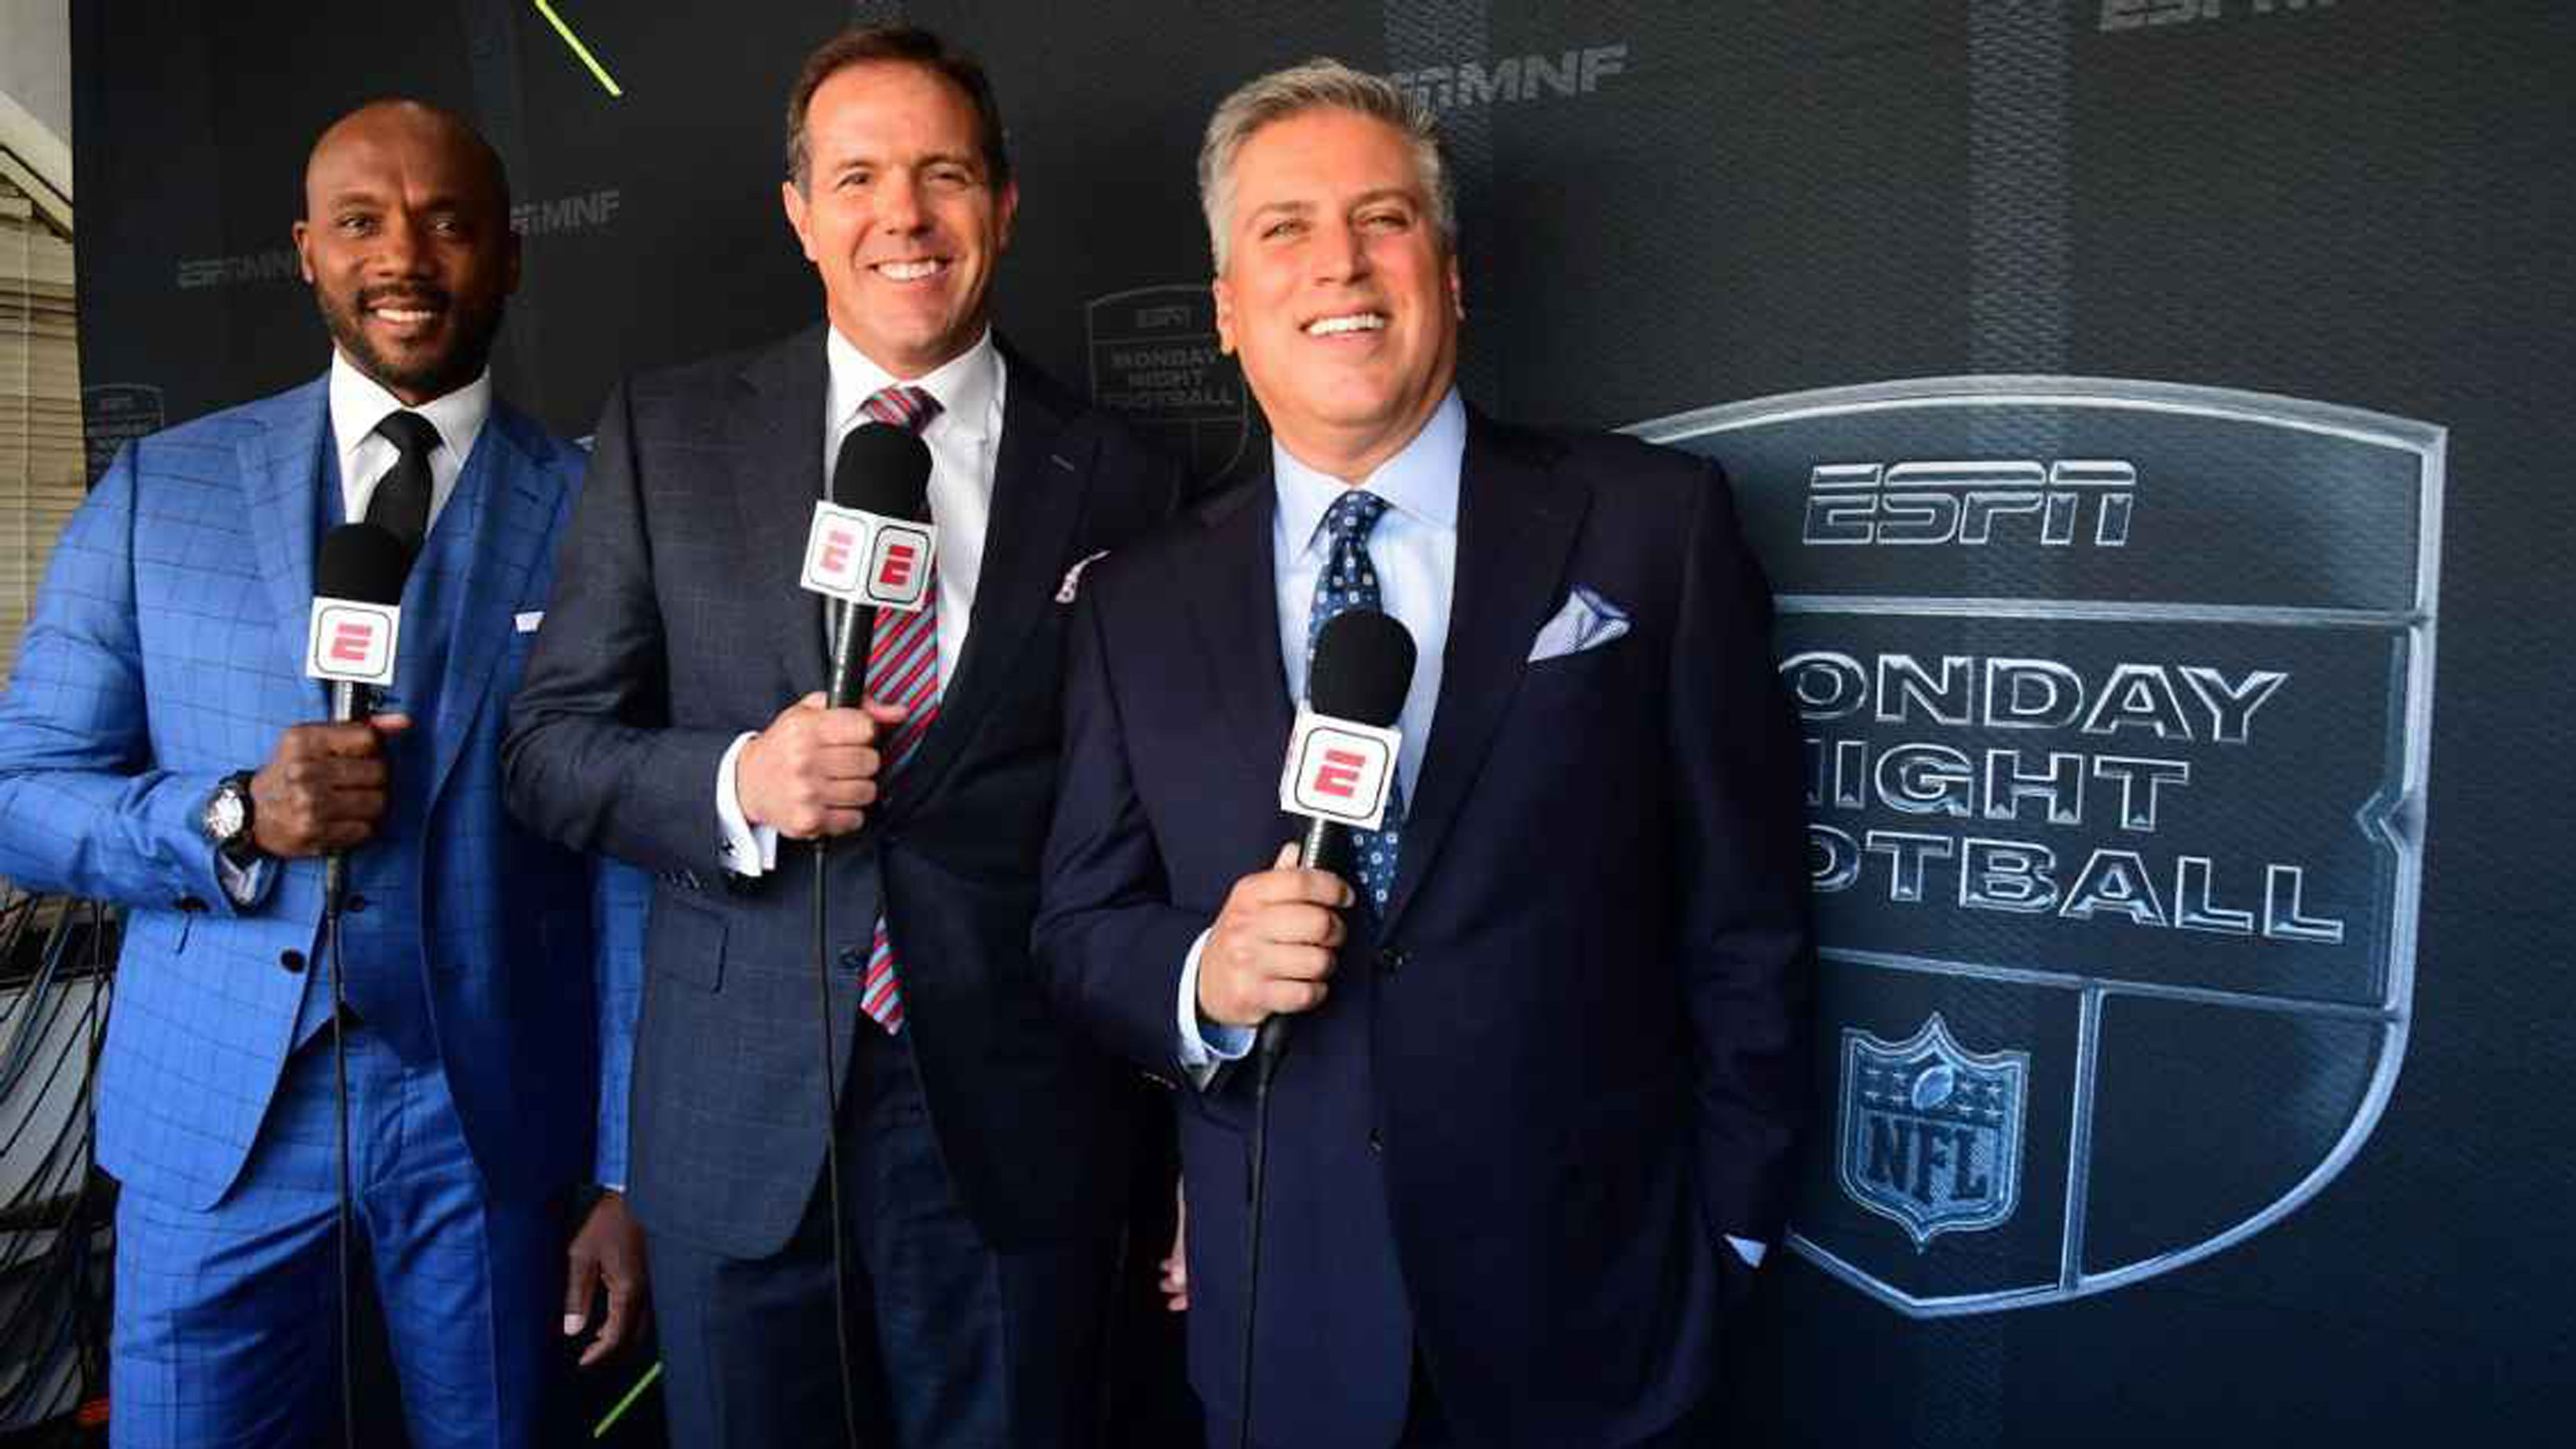 ESPN's Monday Night Football Delivers 15.9 Million Viewers for Second  Consecutive Week - ESPN Press Room U.S.